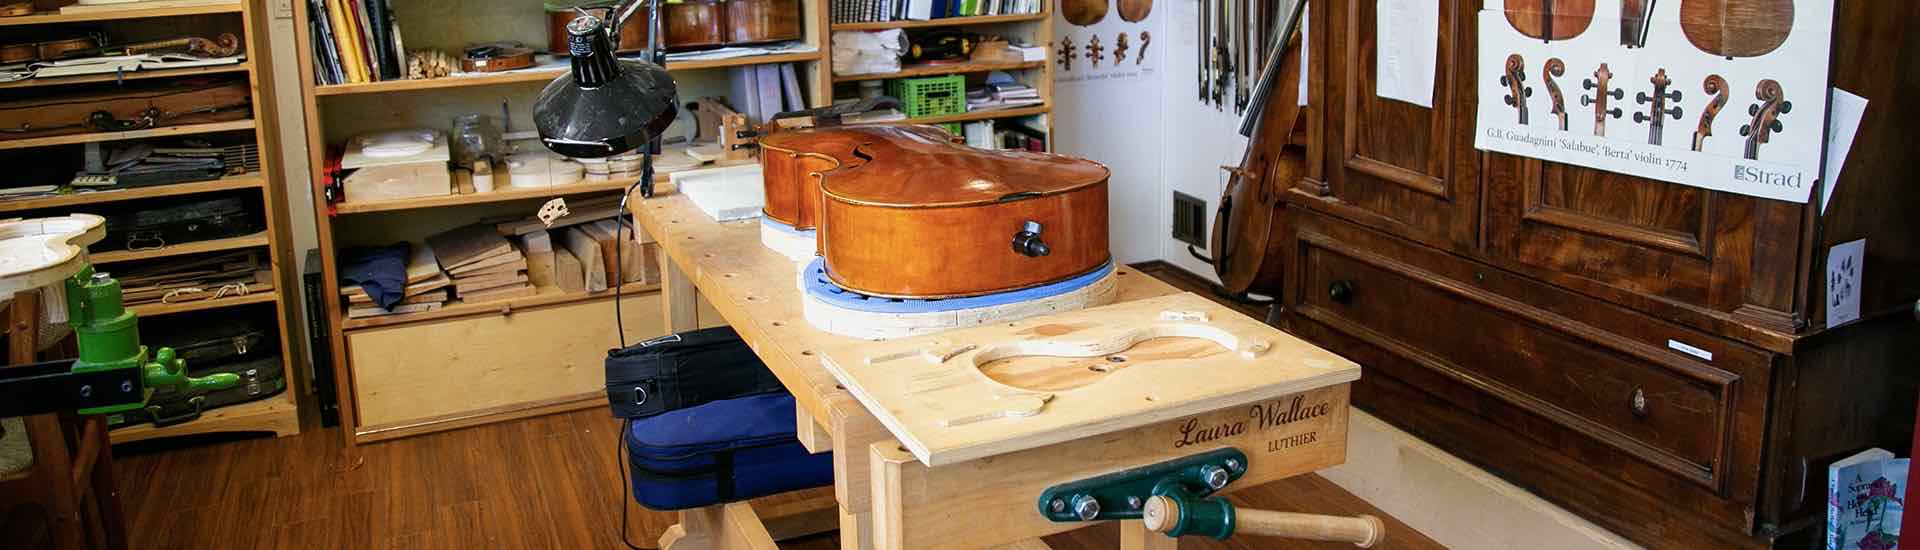 Clement & Wallace custom violin maker's shop with a project on the workbench.